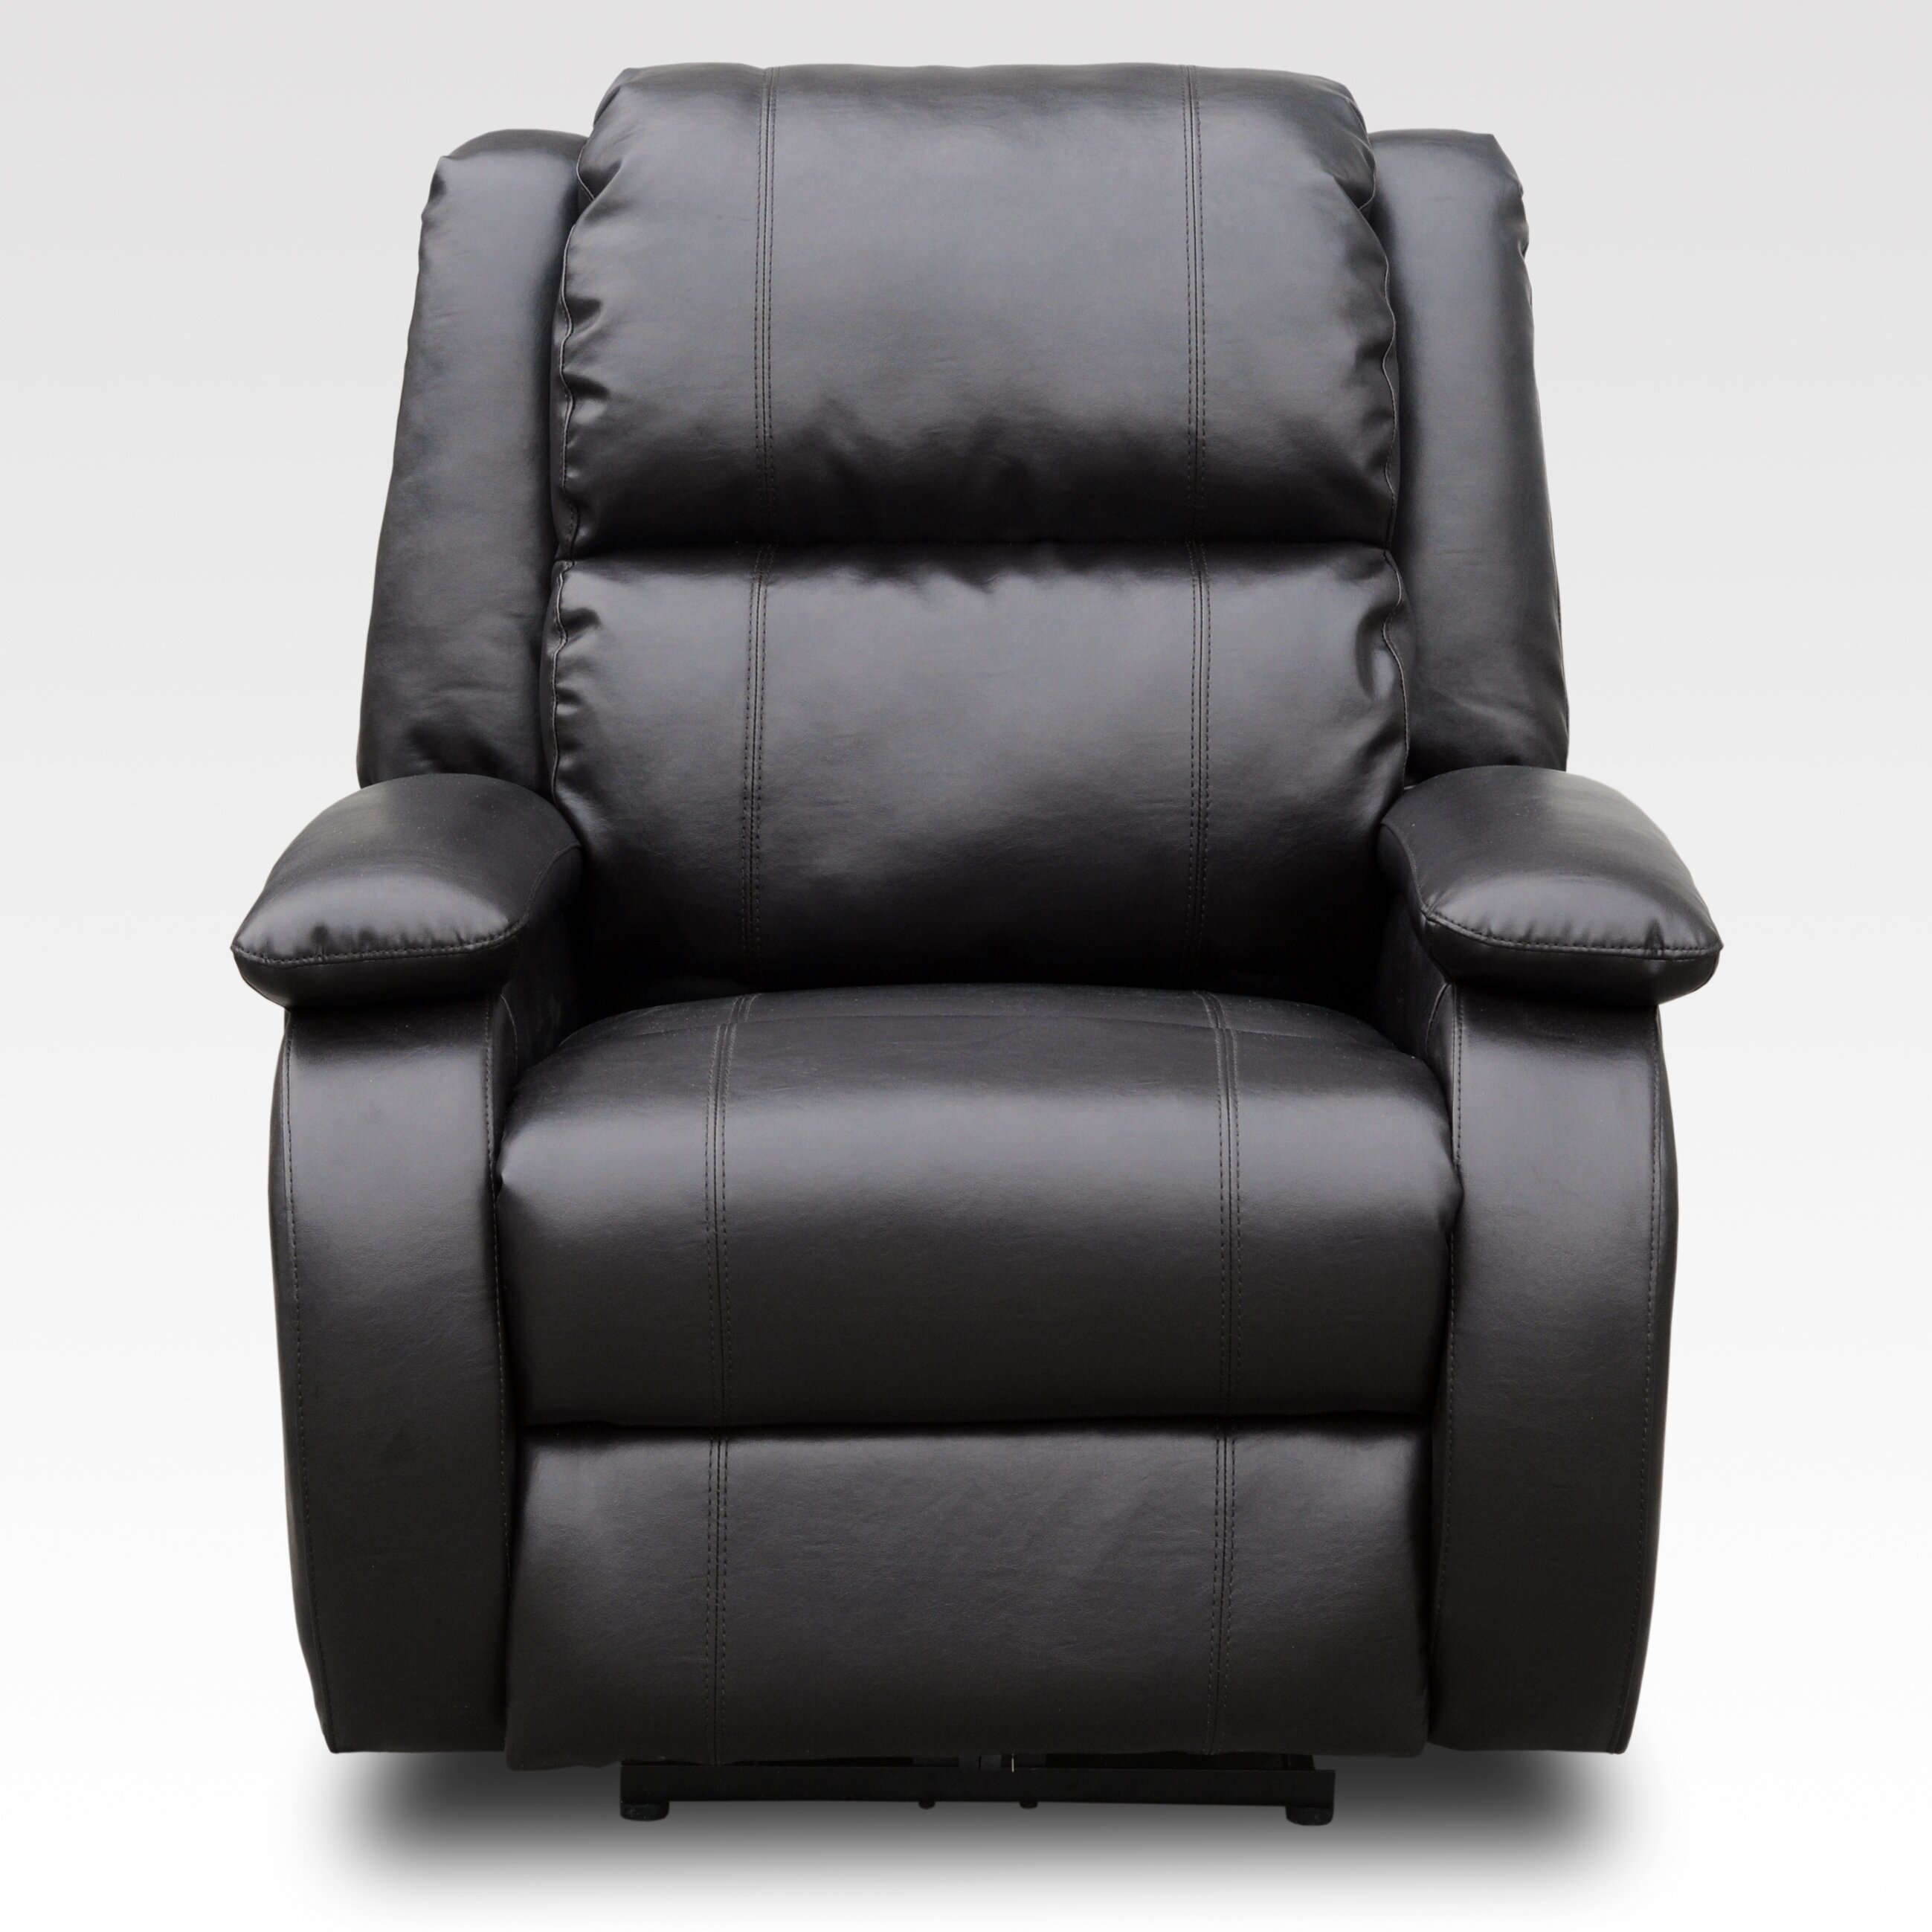 AC Pacific Bonded Leather Reclining Massage Chair & Reviews | Wayfair